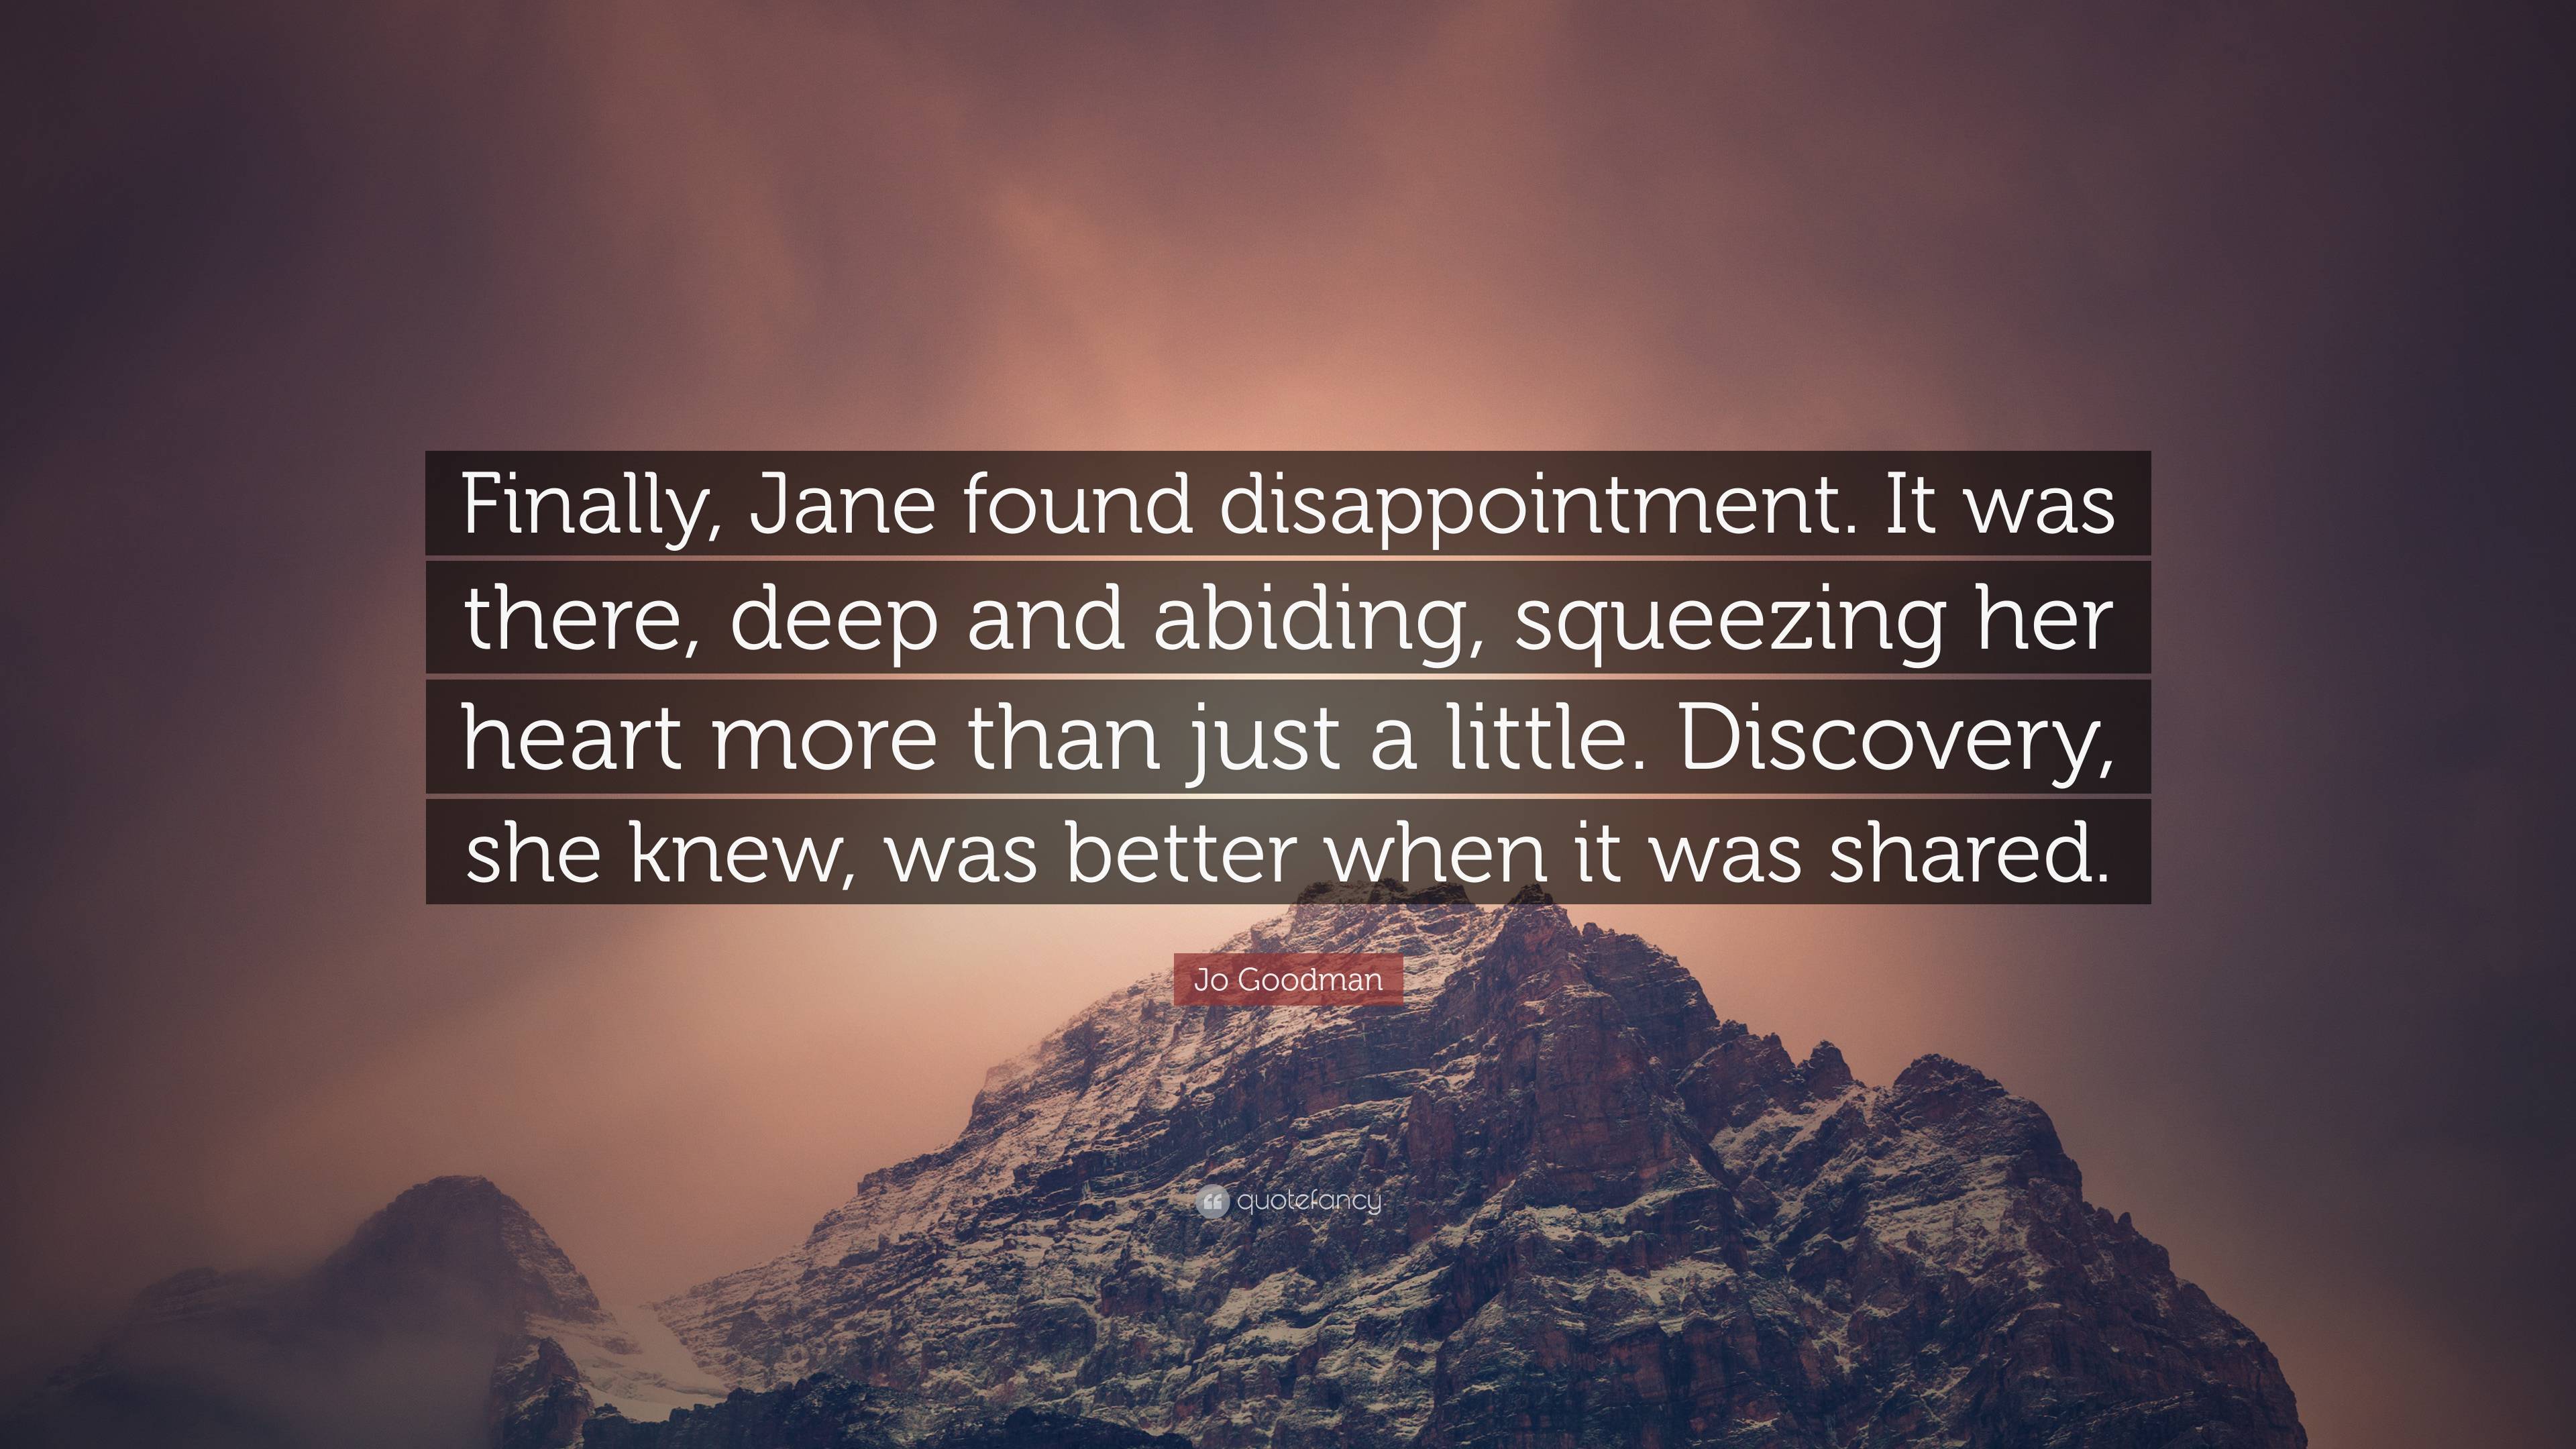 https://quotefancy.com/media/wallpaper/3840x2160/7580953-Jo-Goodman-Quote-Finally-Jane-found-disappointment-It-was-there.jpg